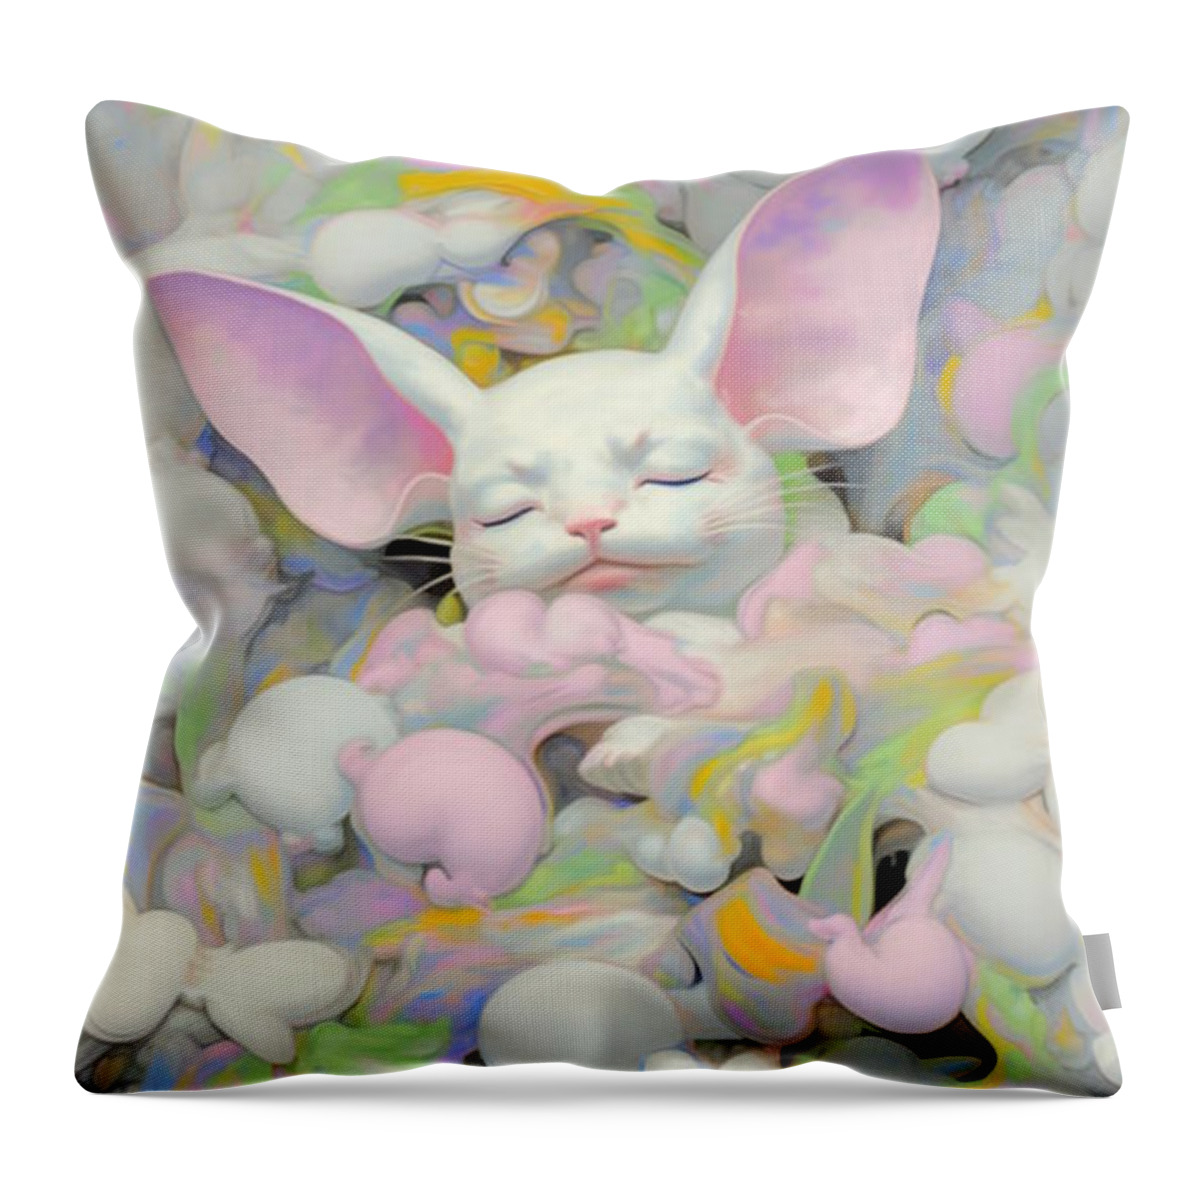  Throw Pillow featuring the digital art Case No 9 by Mark Slauter